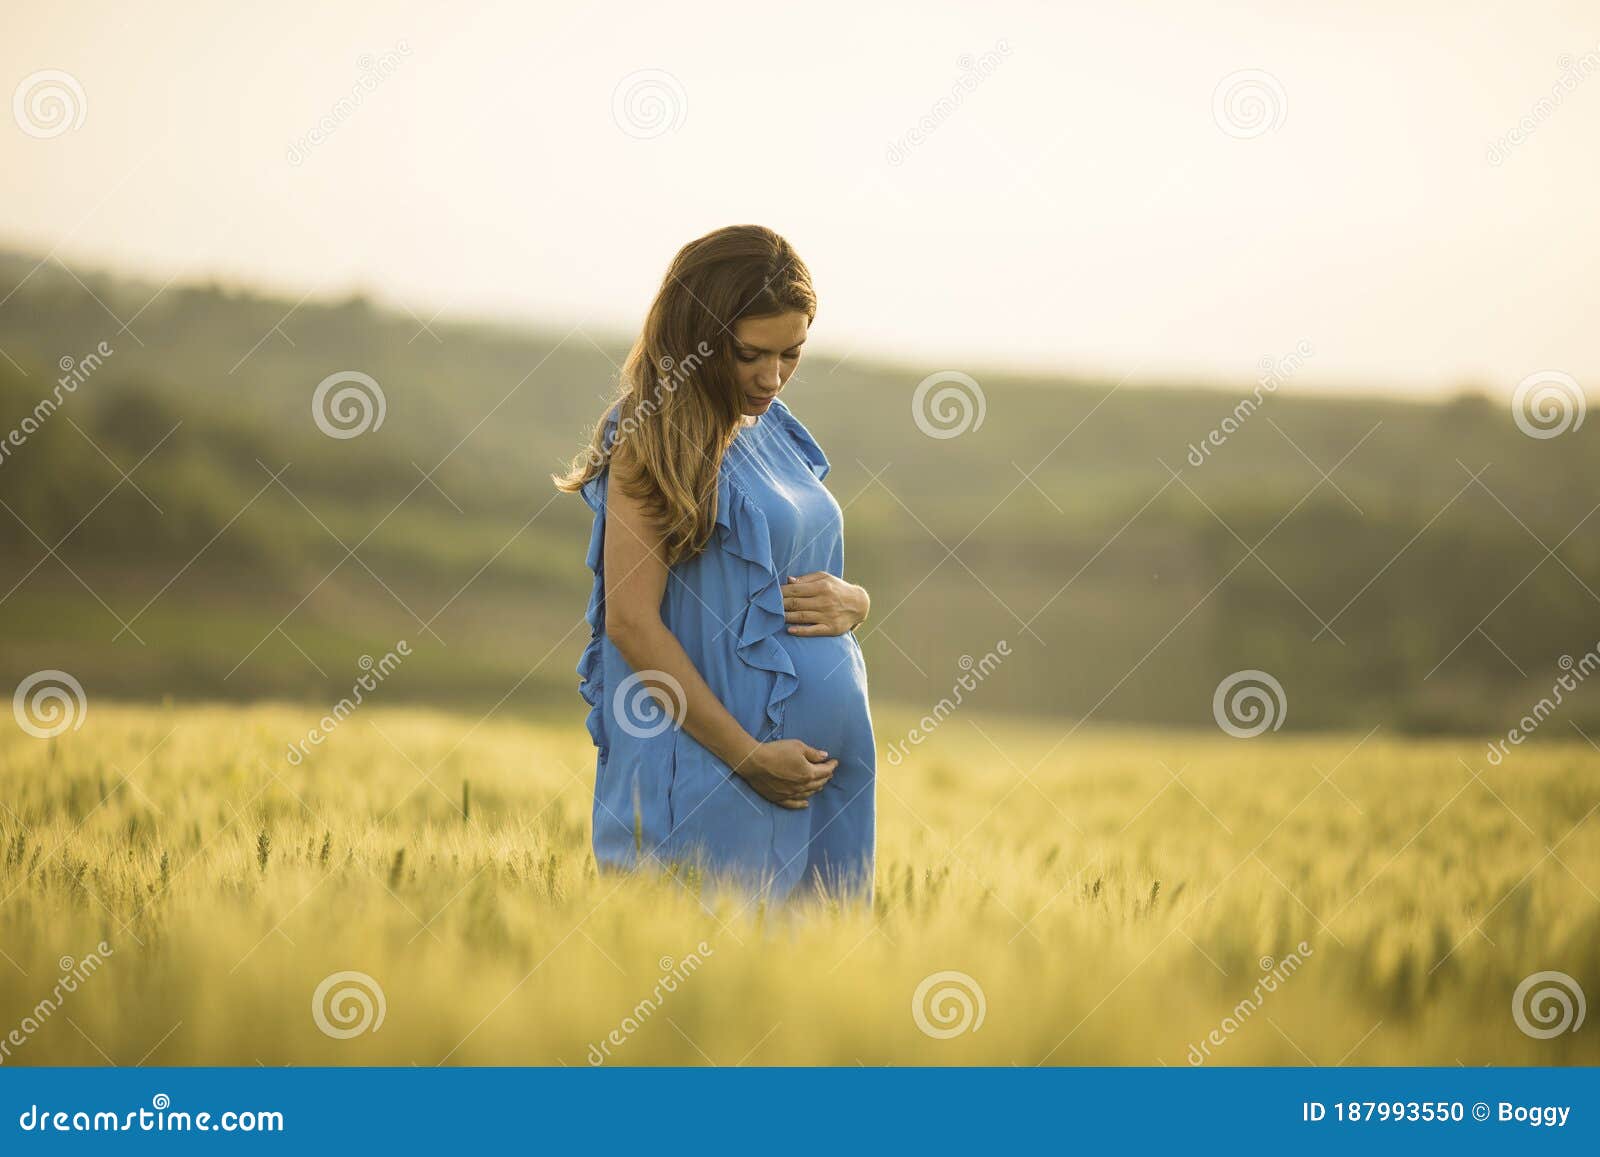 Young Pregnant Woman in the Field Stock Photo - Image of expecting ...